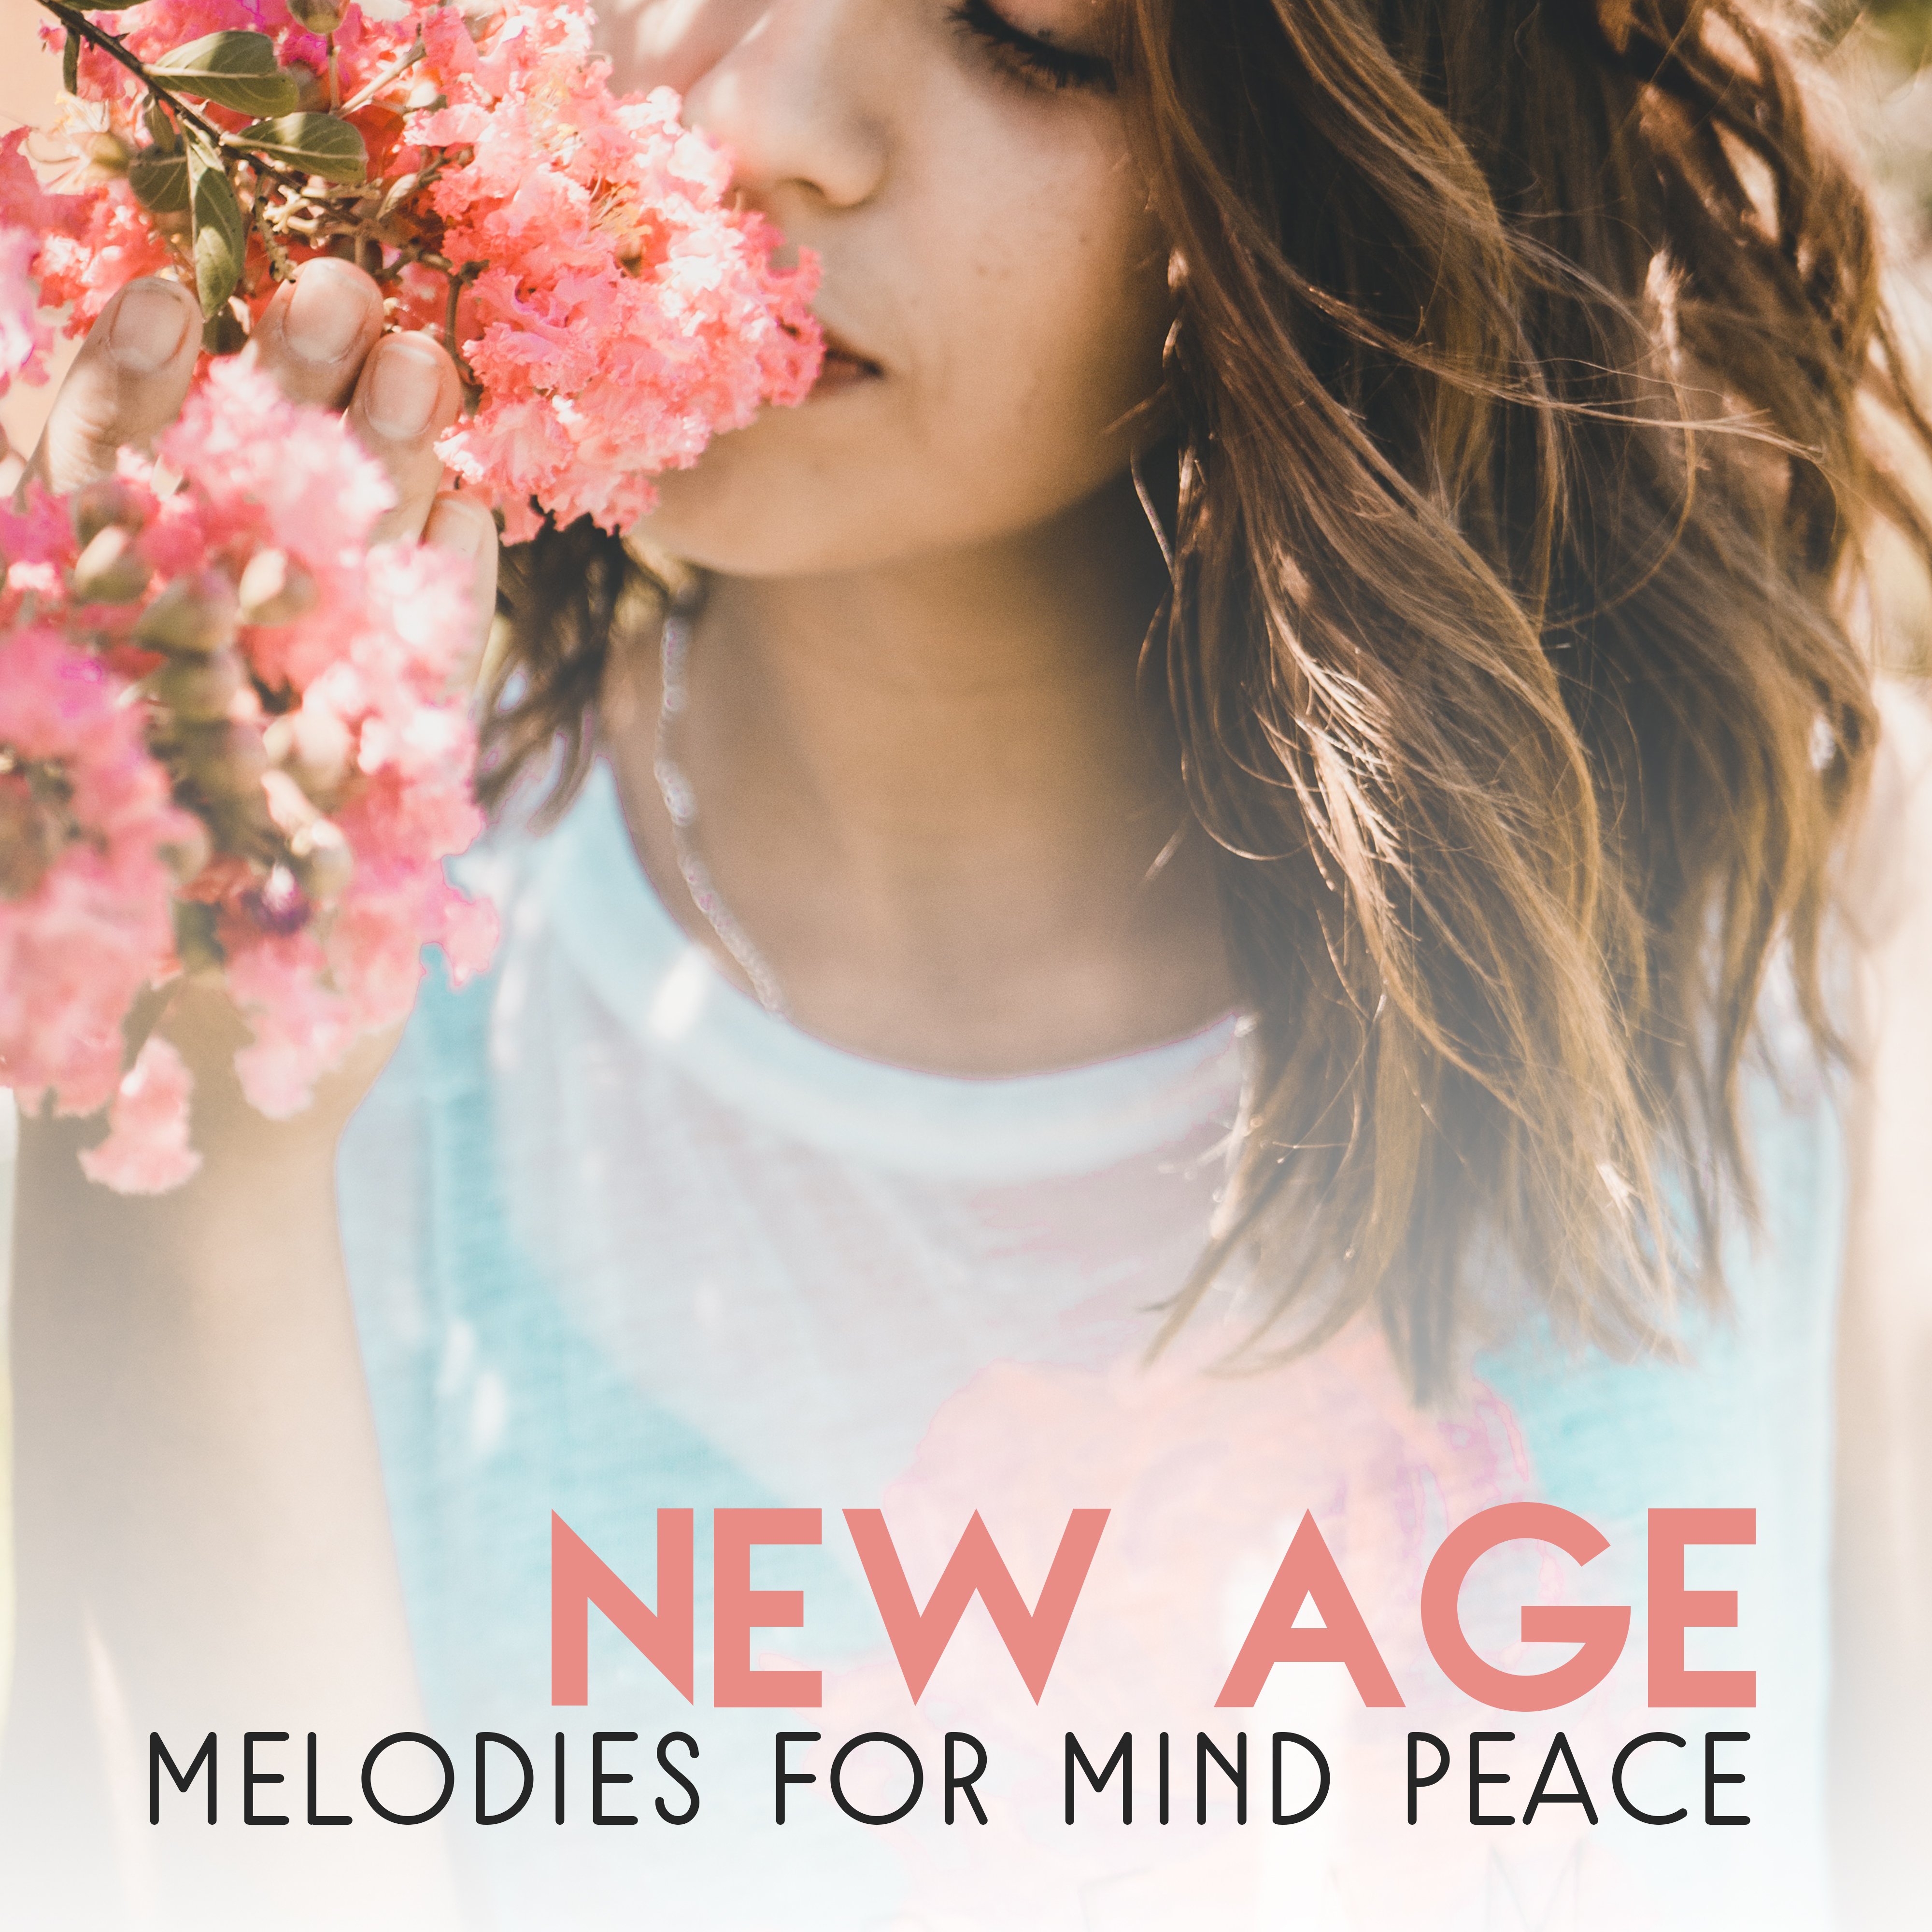 New Age Melodies for Mind Peace – Soft Sounds to Relax, Easy Listening, New Age Relaxation, Rest a Bit, Healing Touch